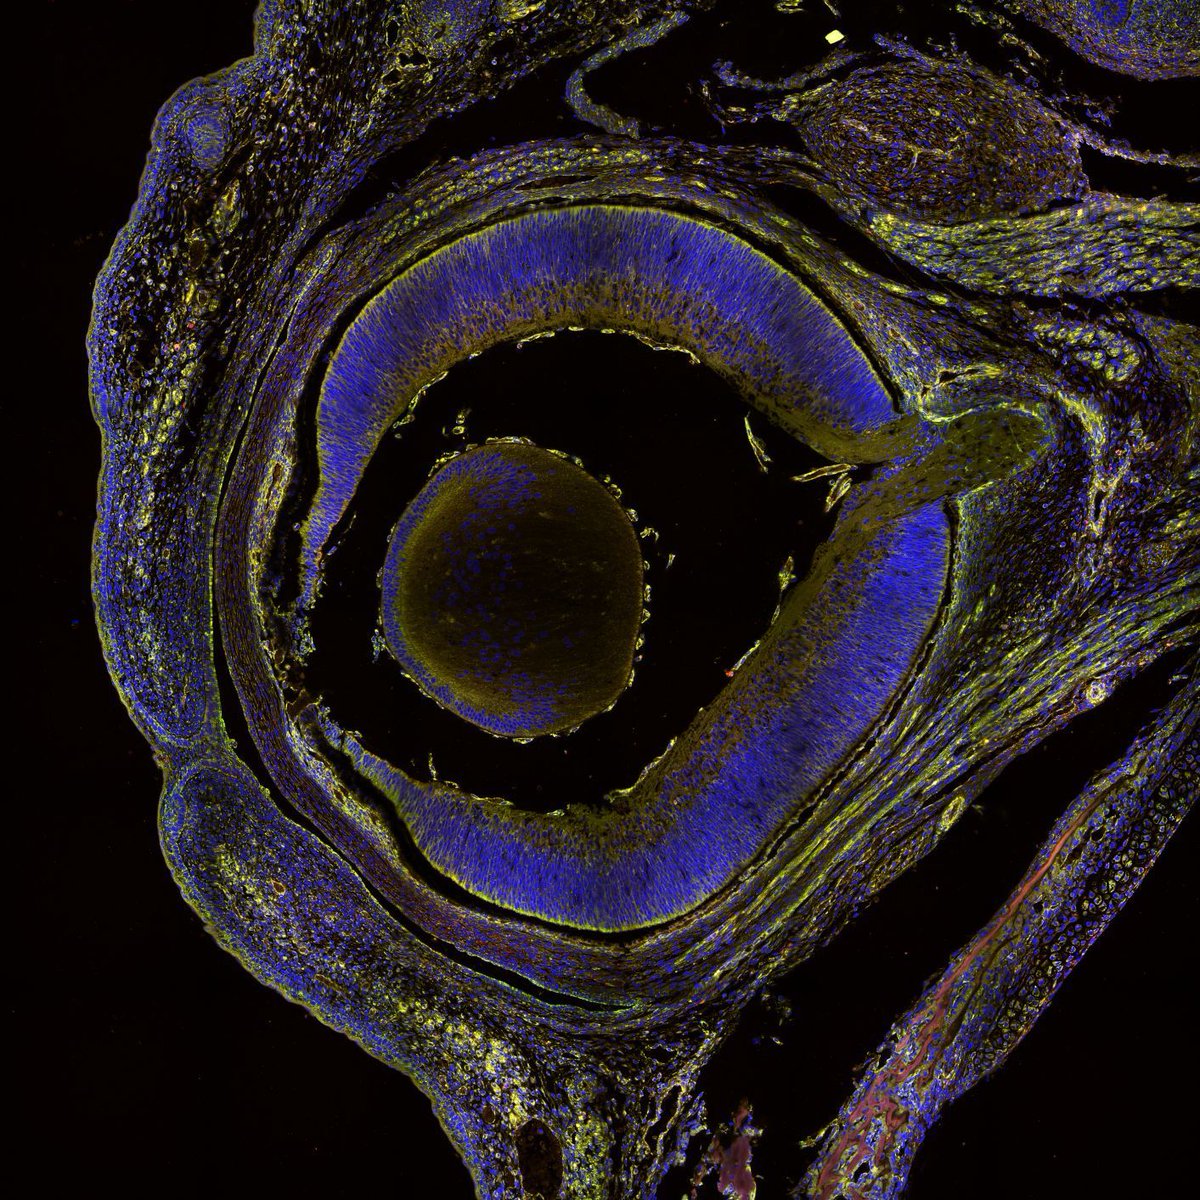 Congratulations to Dr Alan Prescott who won first place in the @Official_BSCB image competition It is a set of tiled images taken from a frozen section of an eye from the mitoQC mouse (McWilliams et al. J Cell Biol. 2016) developed by @LabGanley @mrcppu buff.ly/49TLYqL